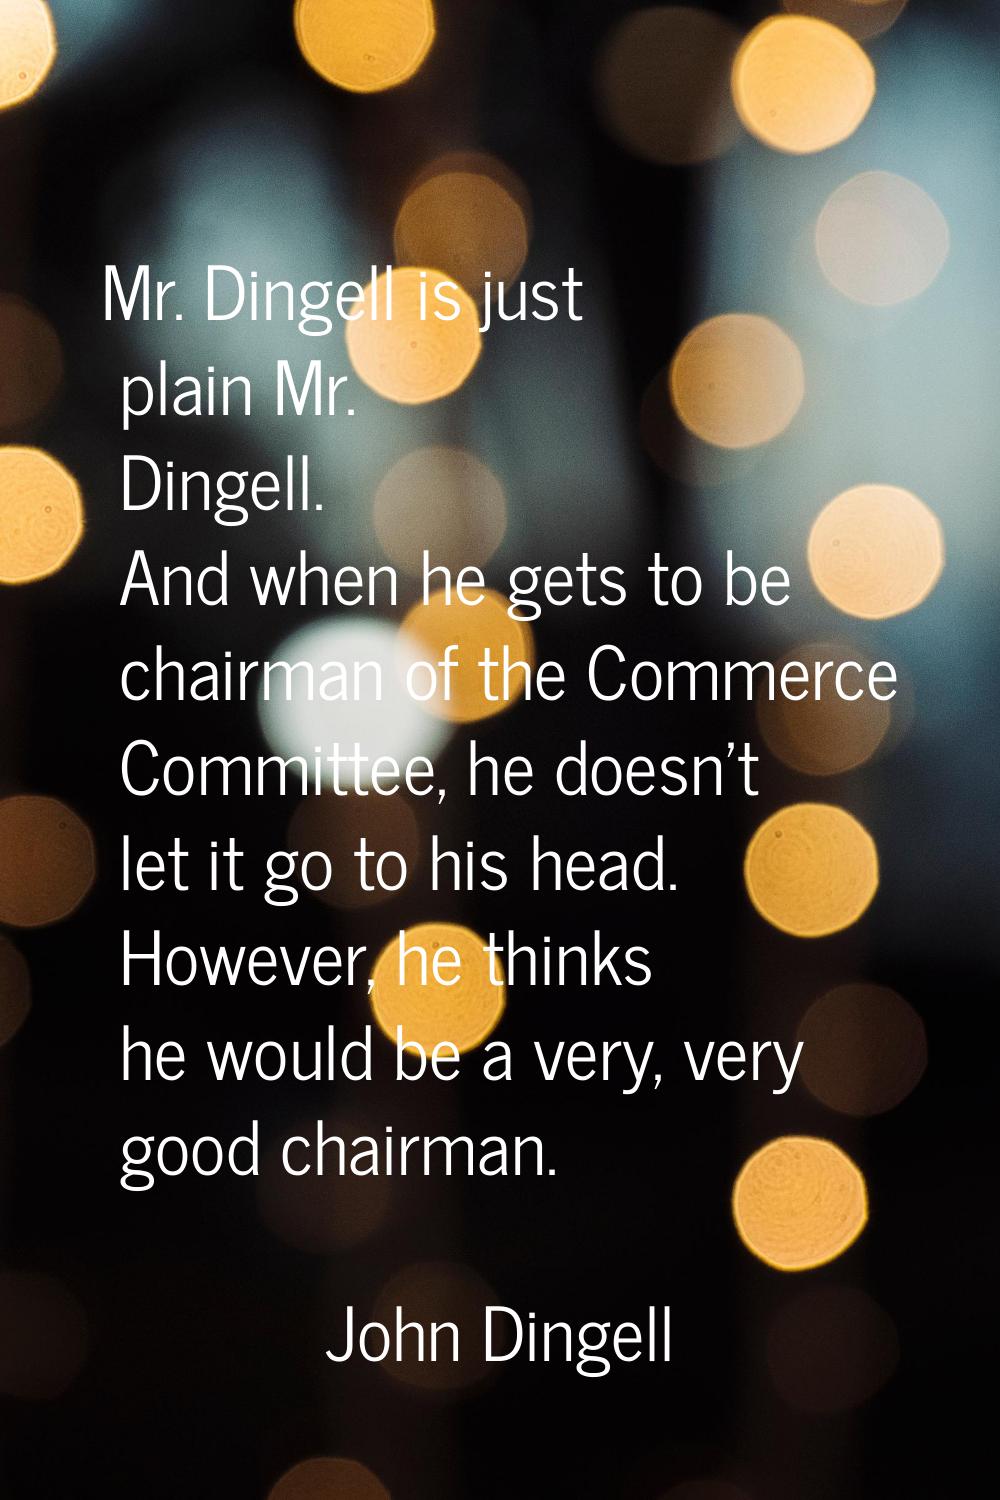 Mr. Dingell is just plain Mr. Dingell. And when he gets to be chairman of the Commerce Committee, h